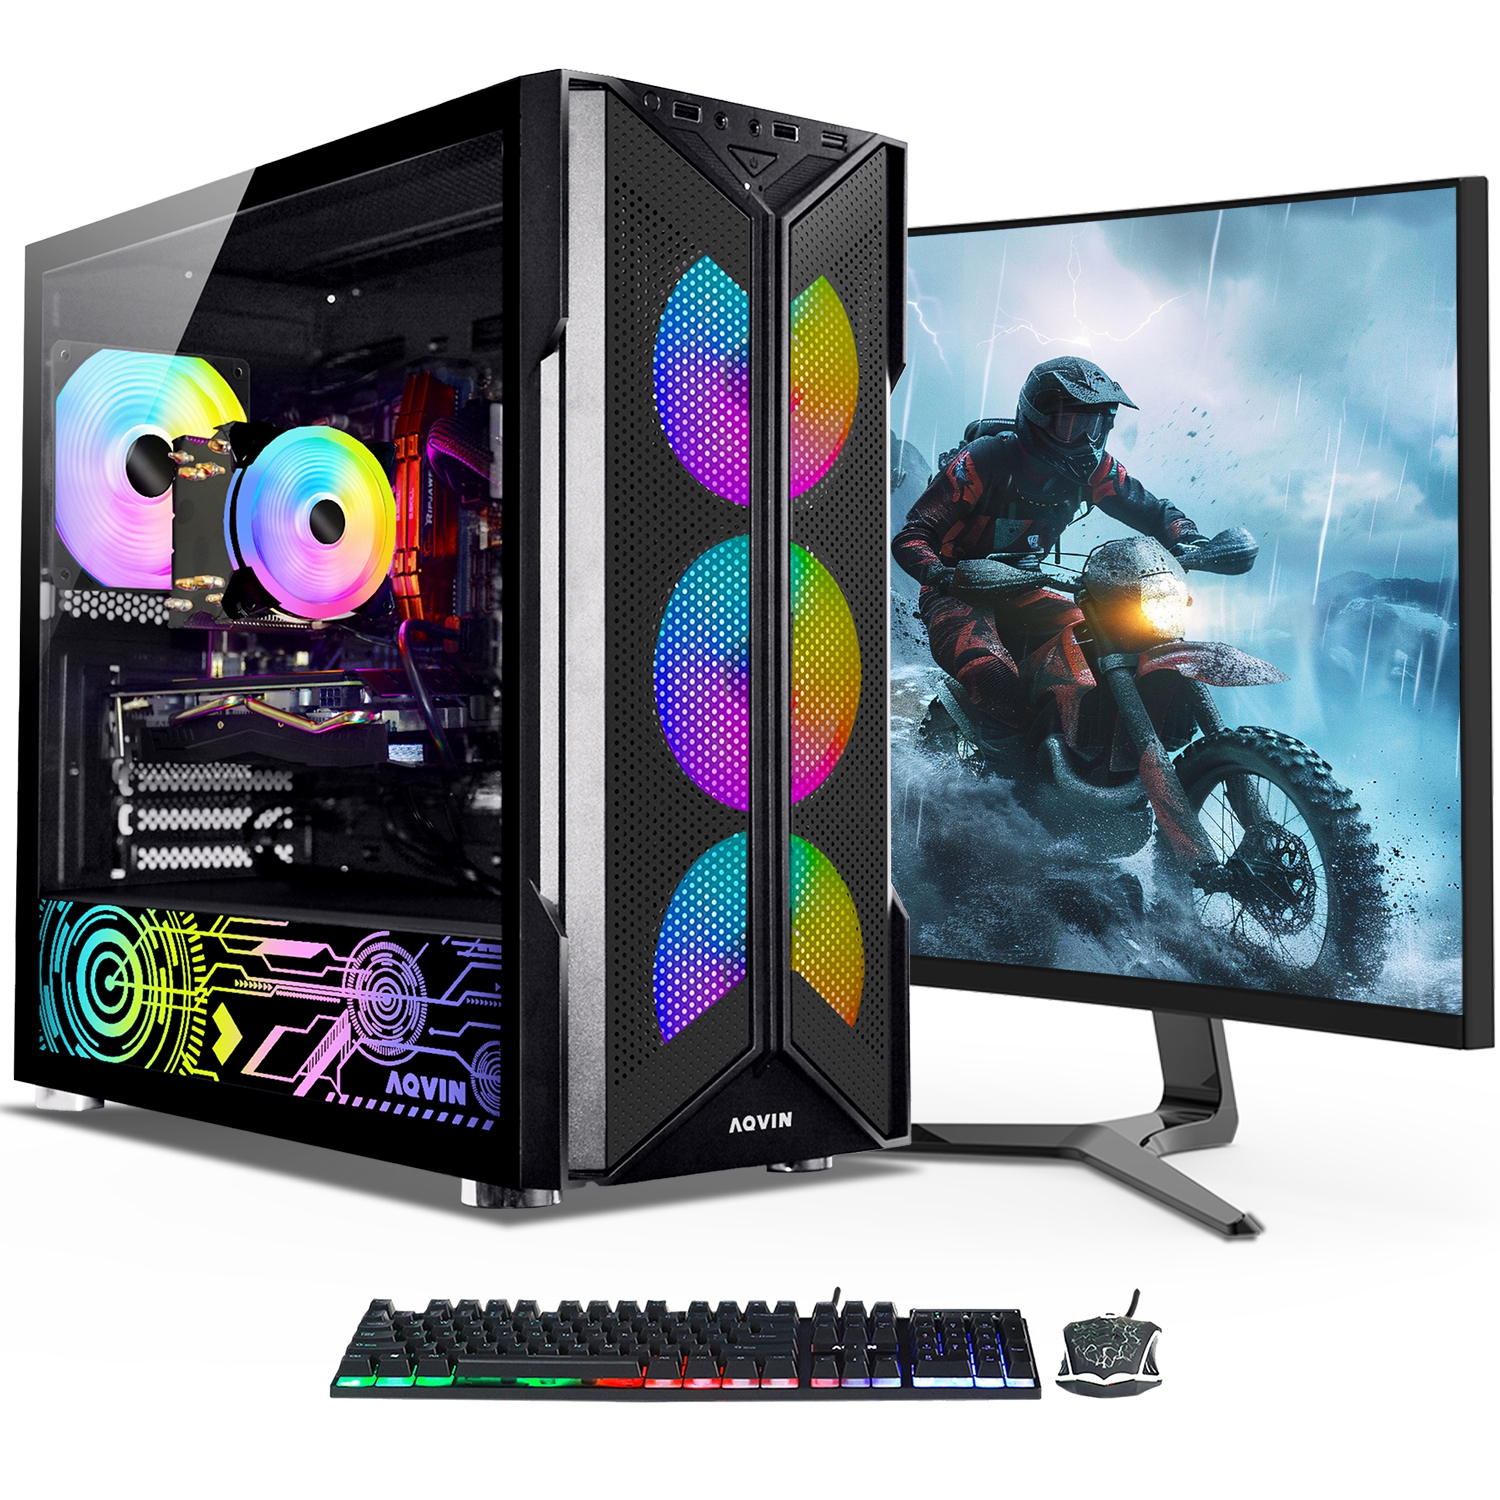 AQVIN AQ20 Gaming Desktop Computer PC with 27-inch Curved Gaming Monitor| Intel Hexa-Core i7 up to 4.60 GHz| GeForce RTX 3080 10GB GDDR6| 32GB DDR4 RAM| 1TB SSD| Windows 11 Pro